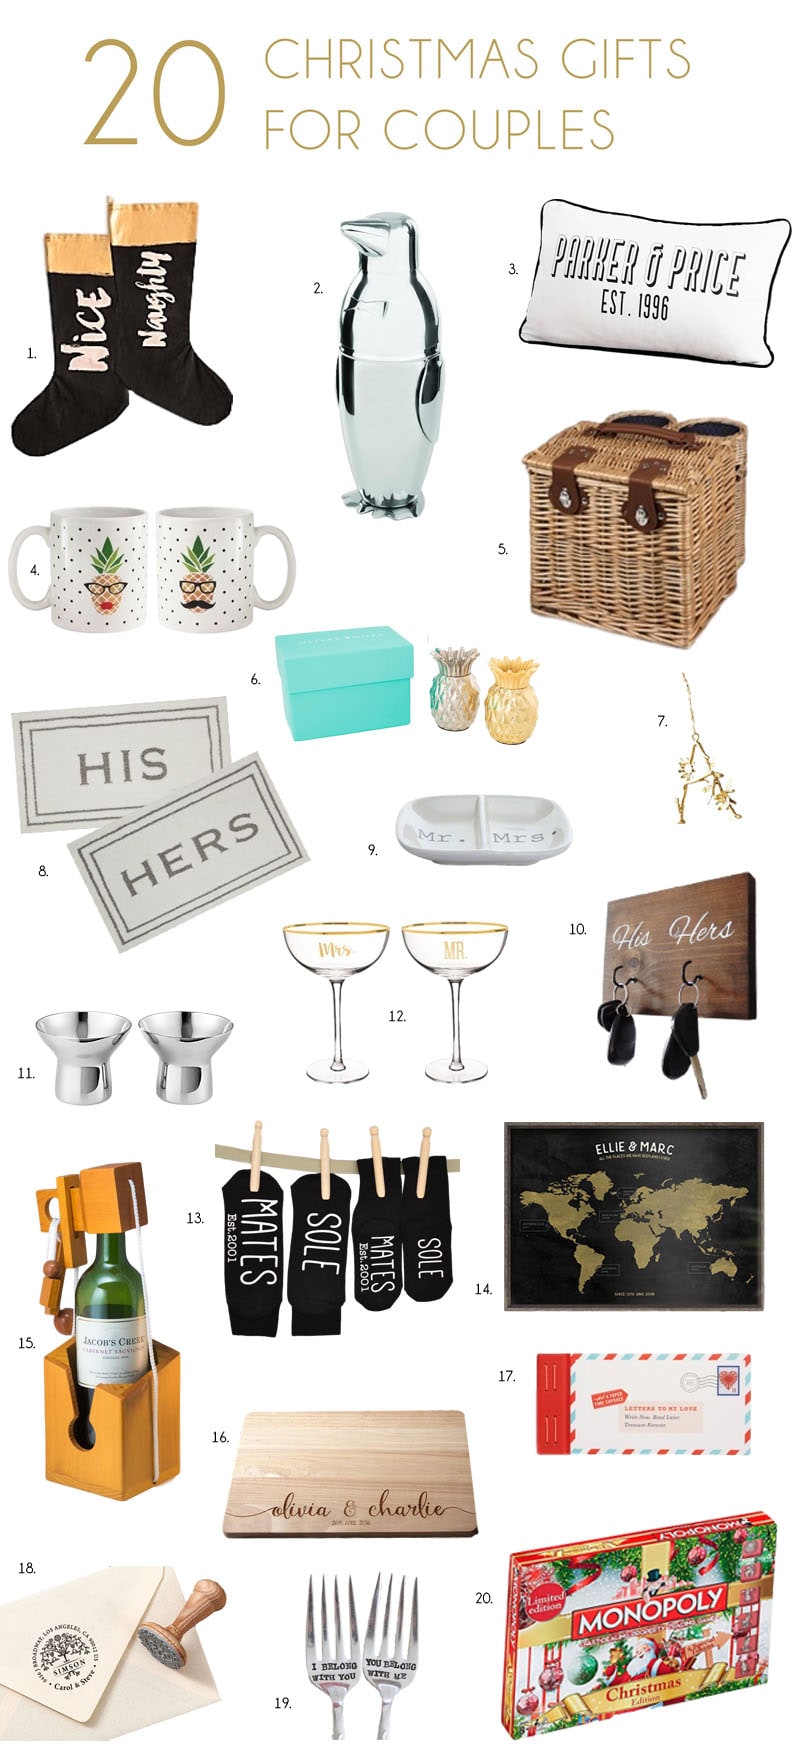 Christmas Gifts for Couples | SouthBound Bride